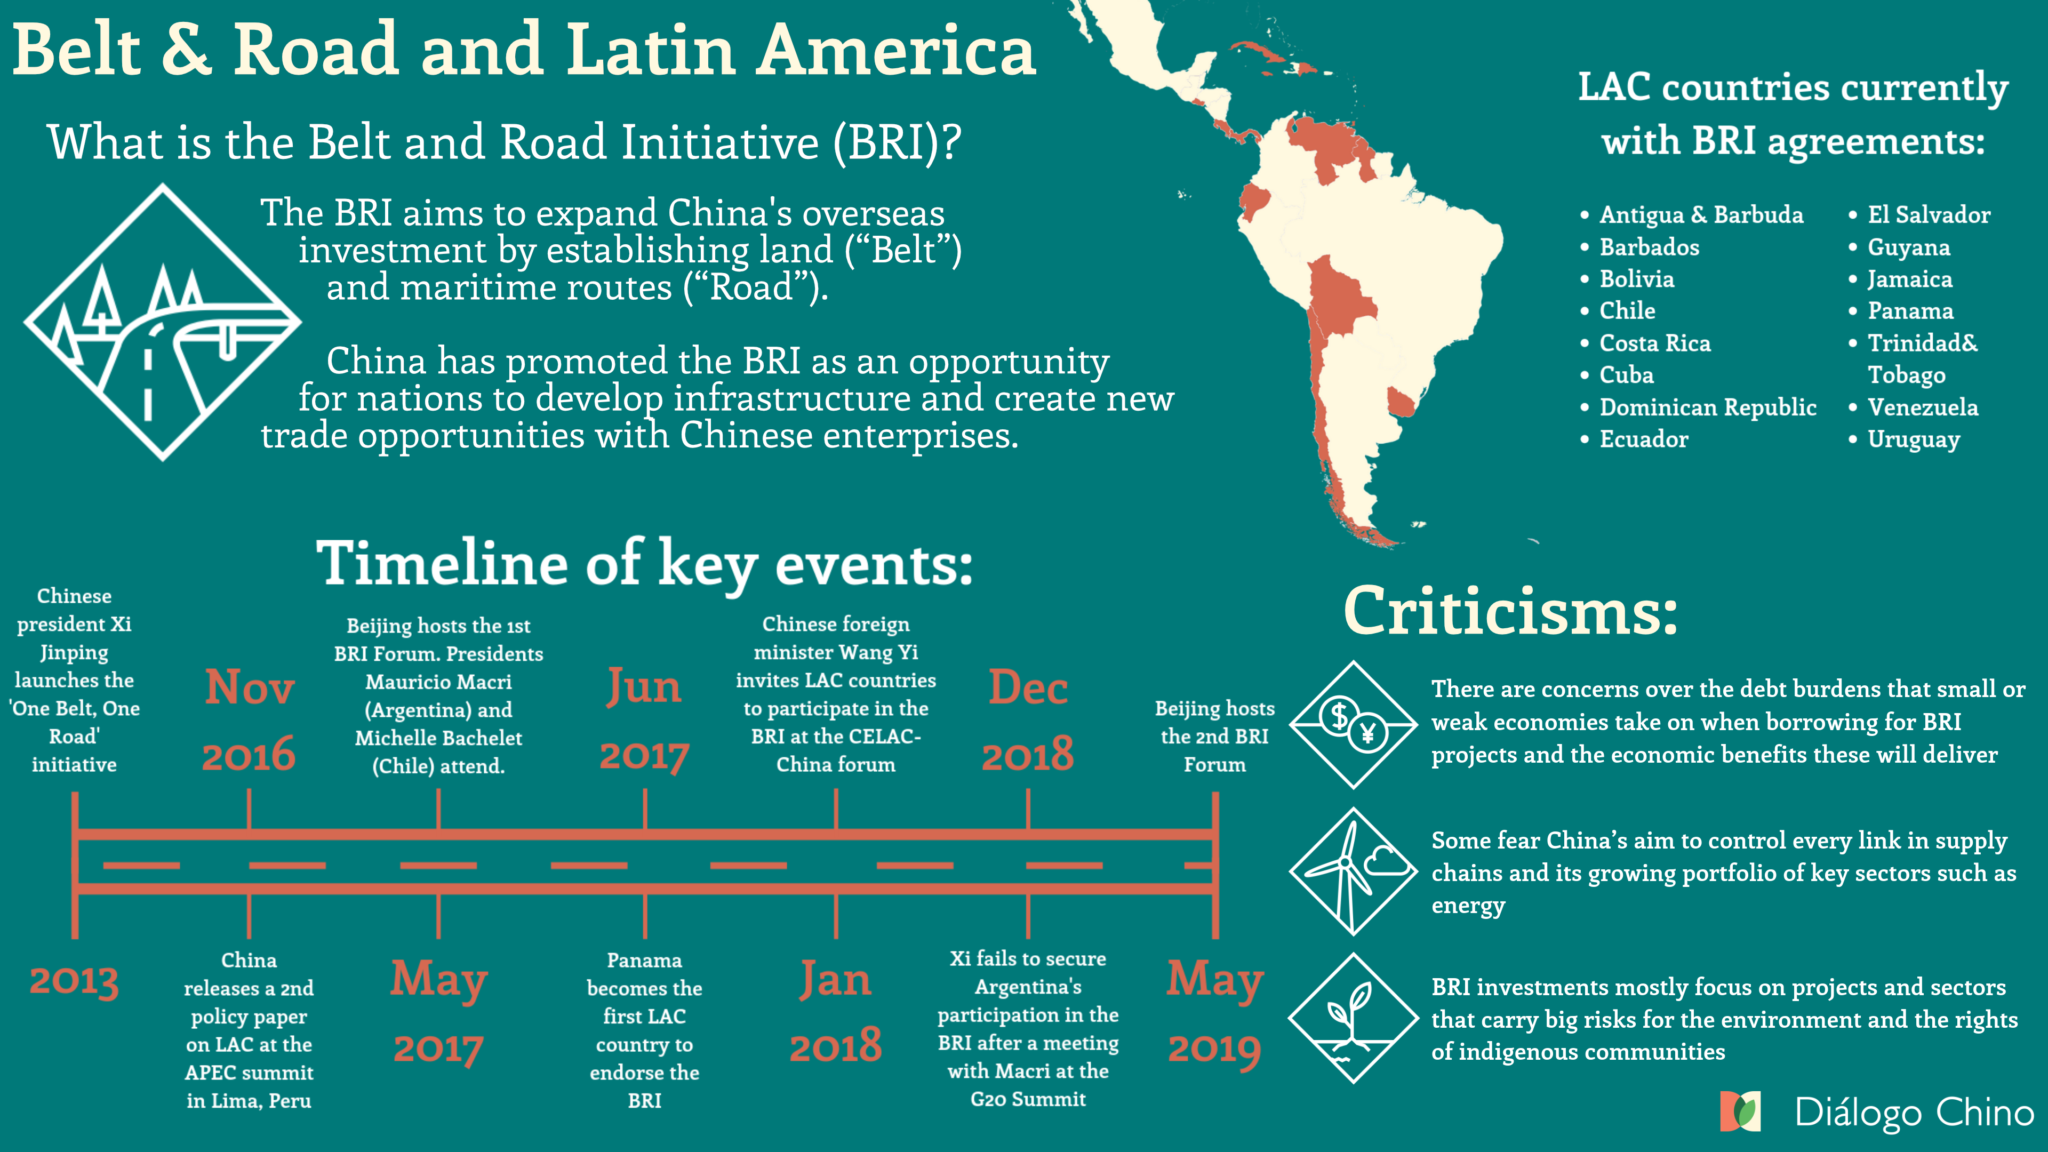 Graph explaining what the Belt and Road Initiative is, with a timeline of key events and a map of Latin America with member countries.